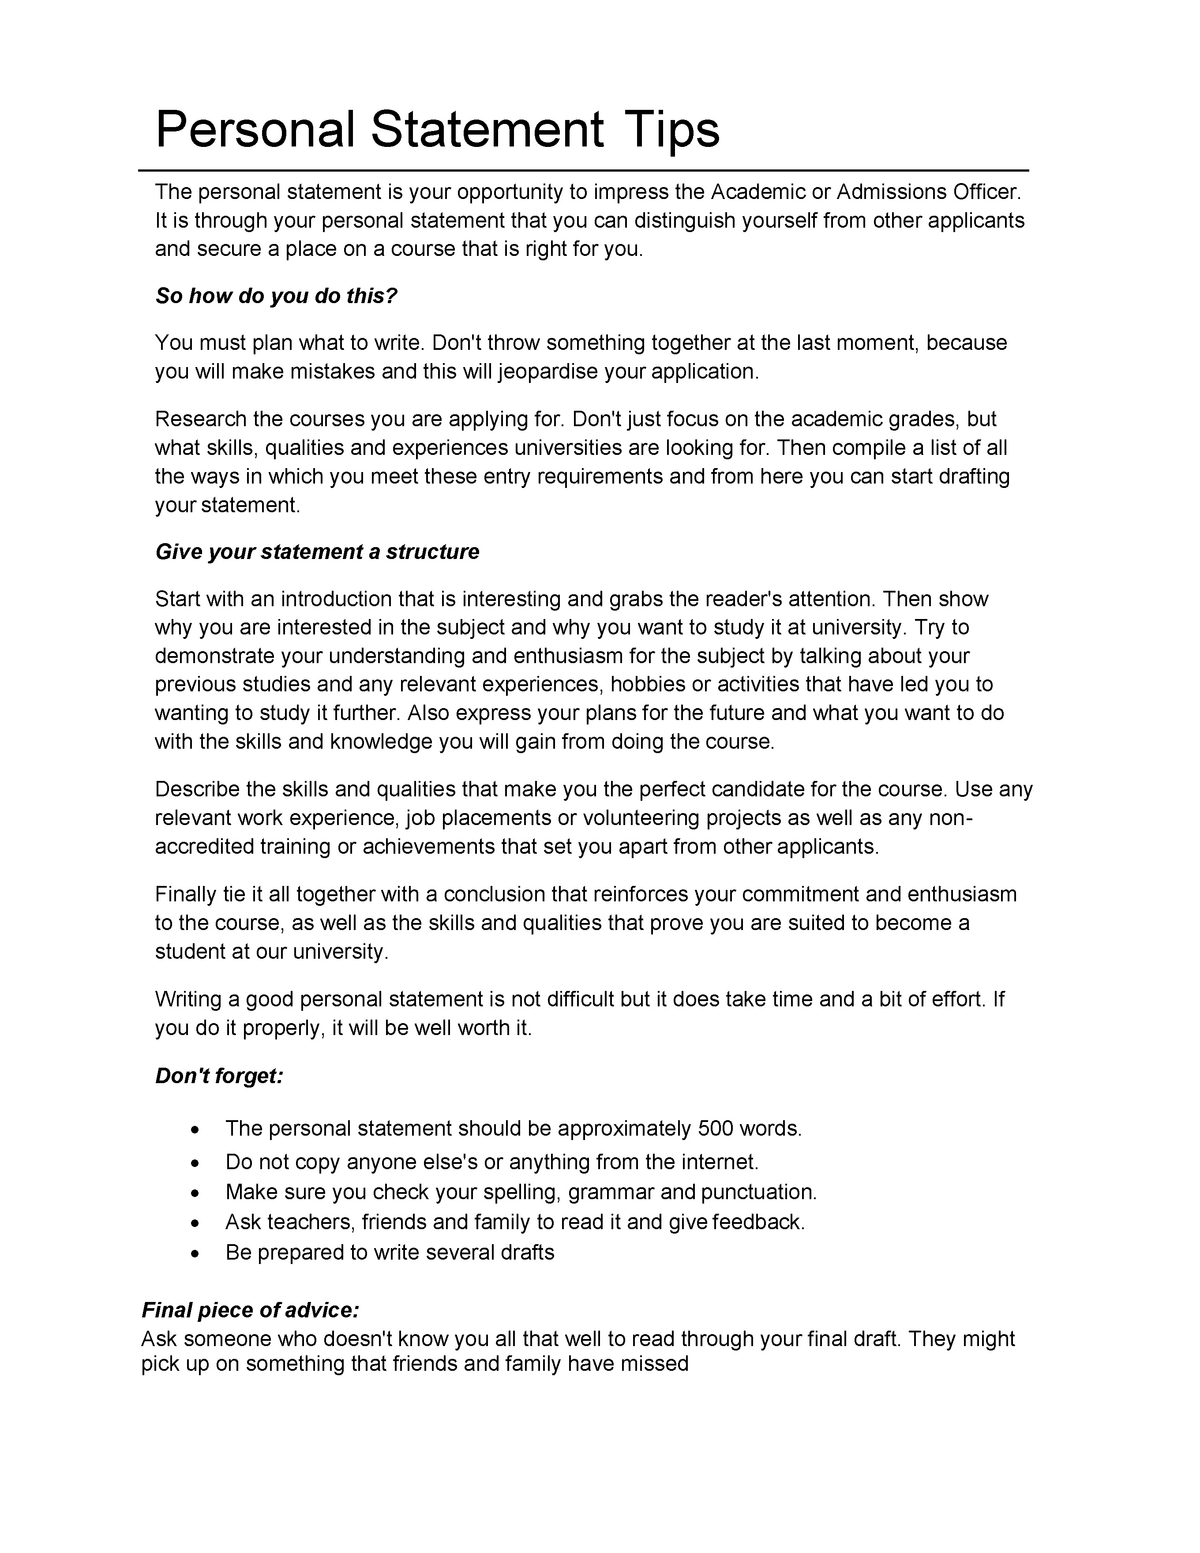 Personal Statement Tipps - It is through your personal statement